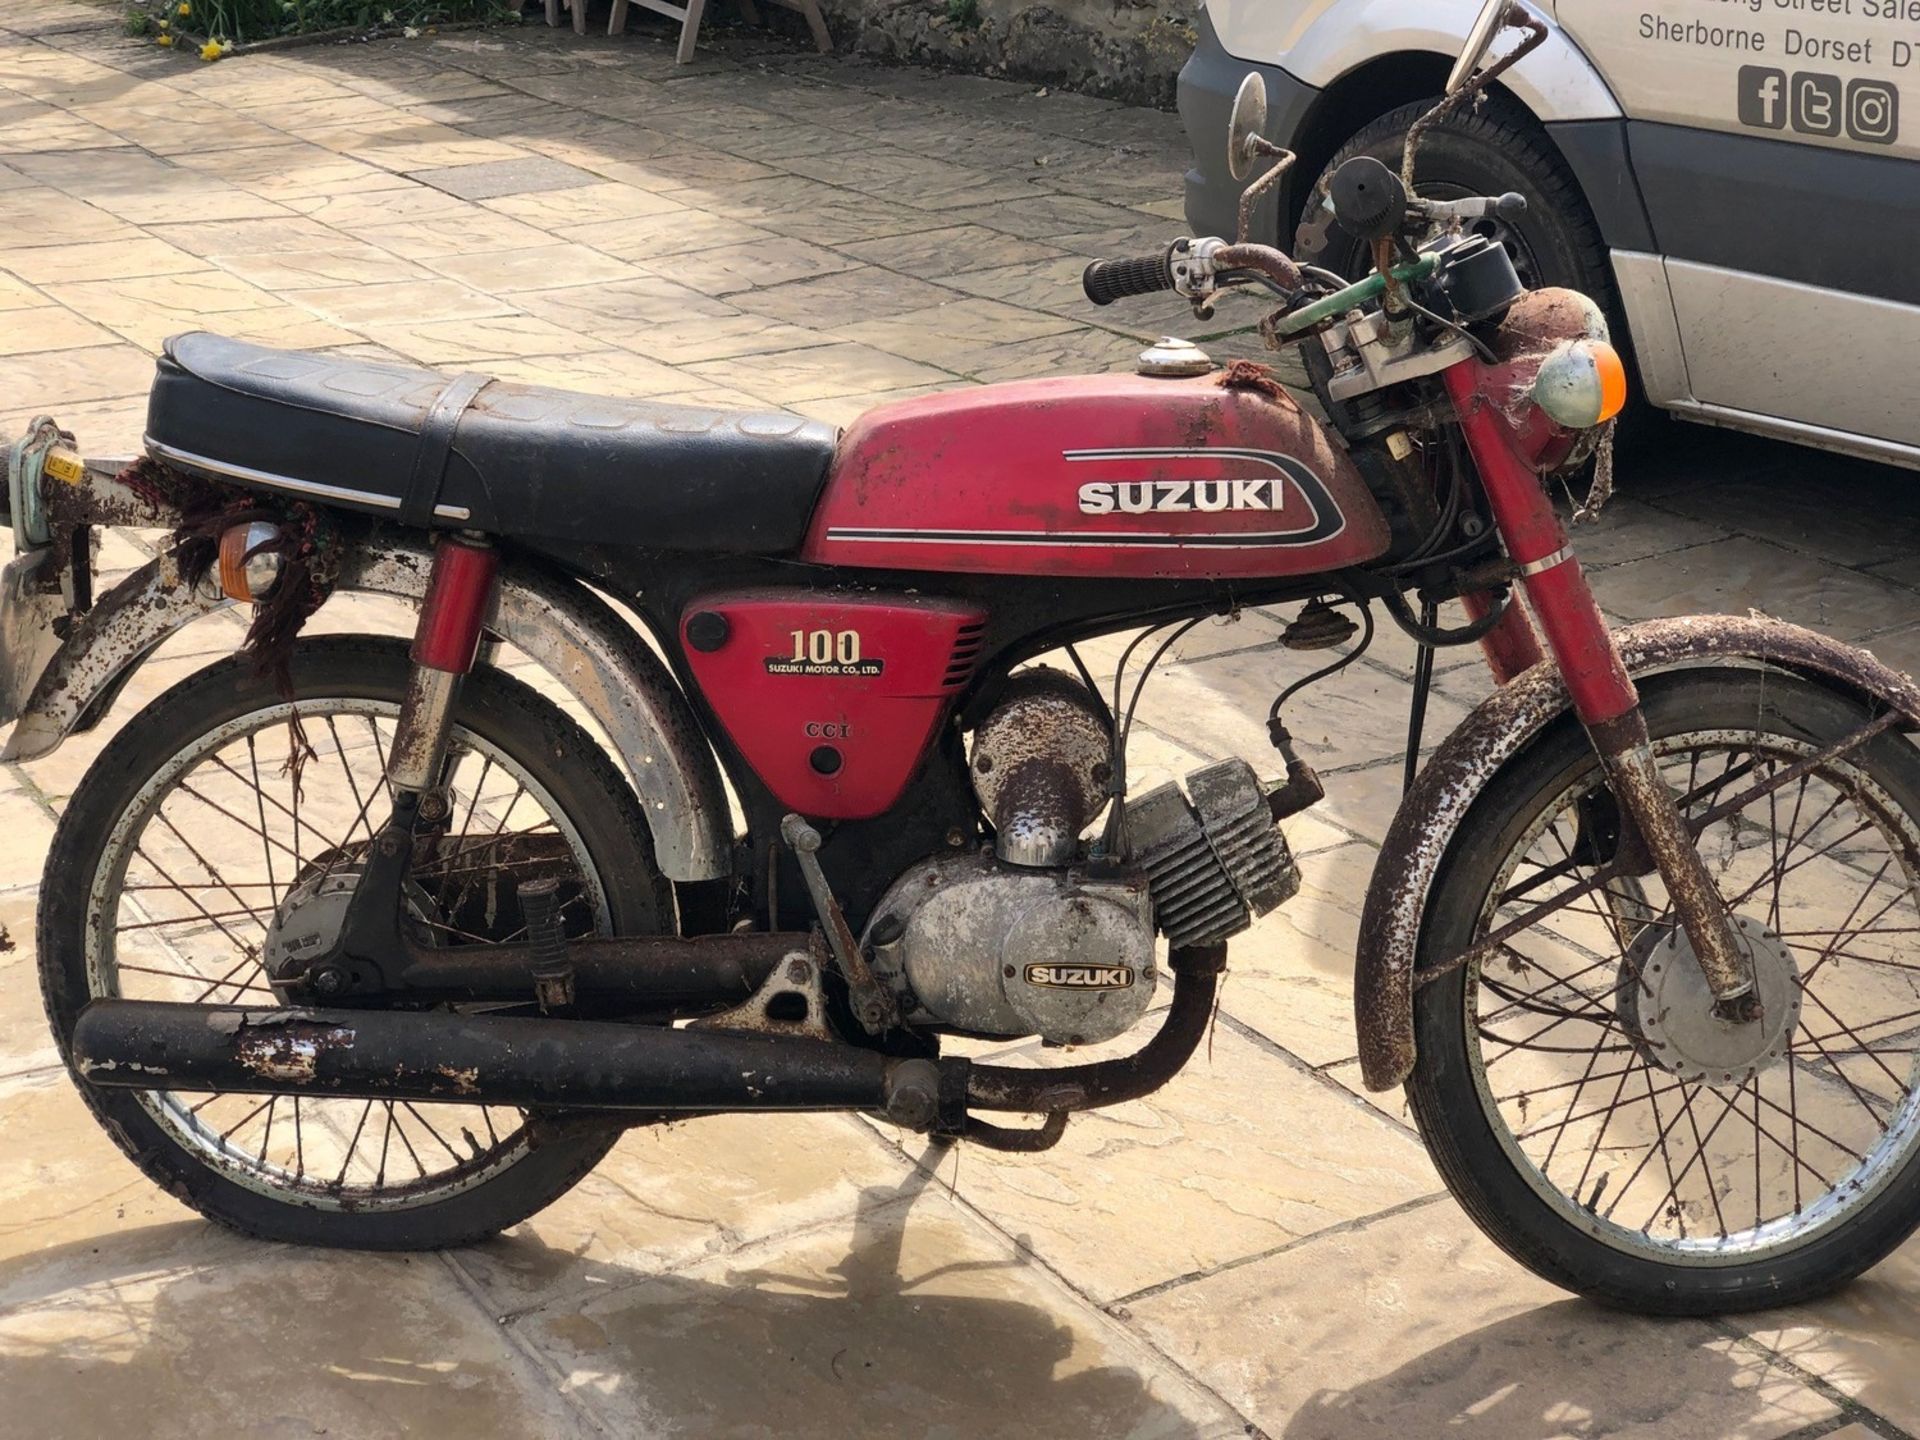 1978 Suzuki 100 CCI Red Registration number ALJ 558T Shed stored for many years No documents For